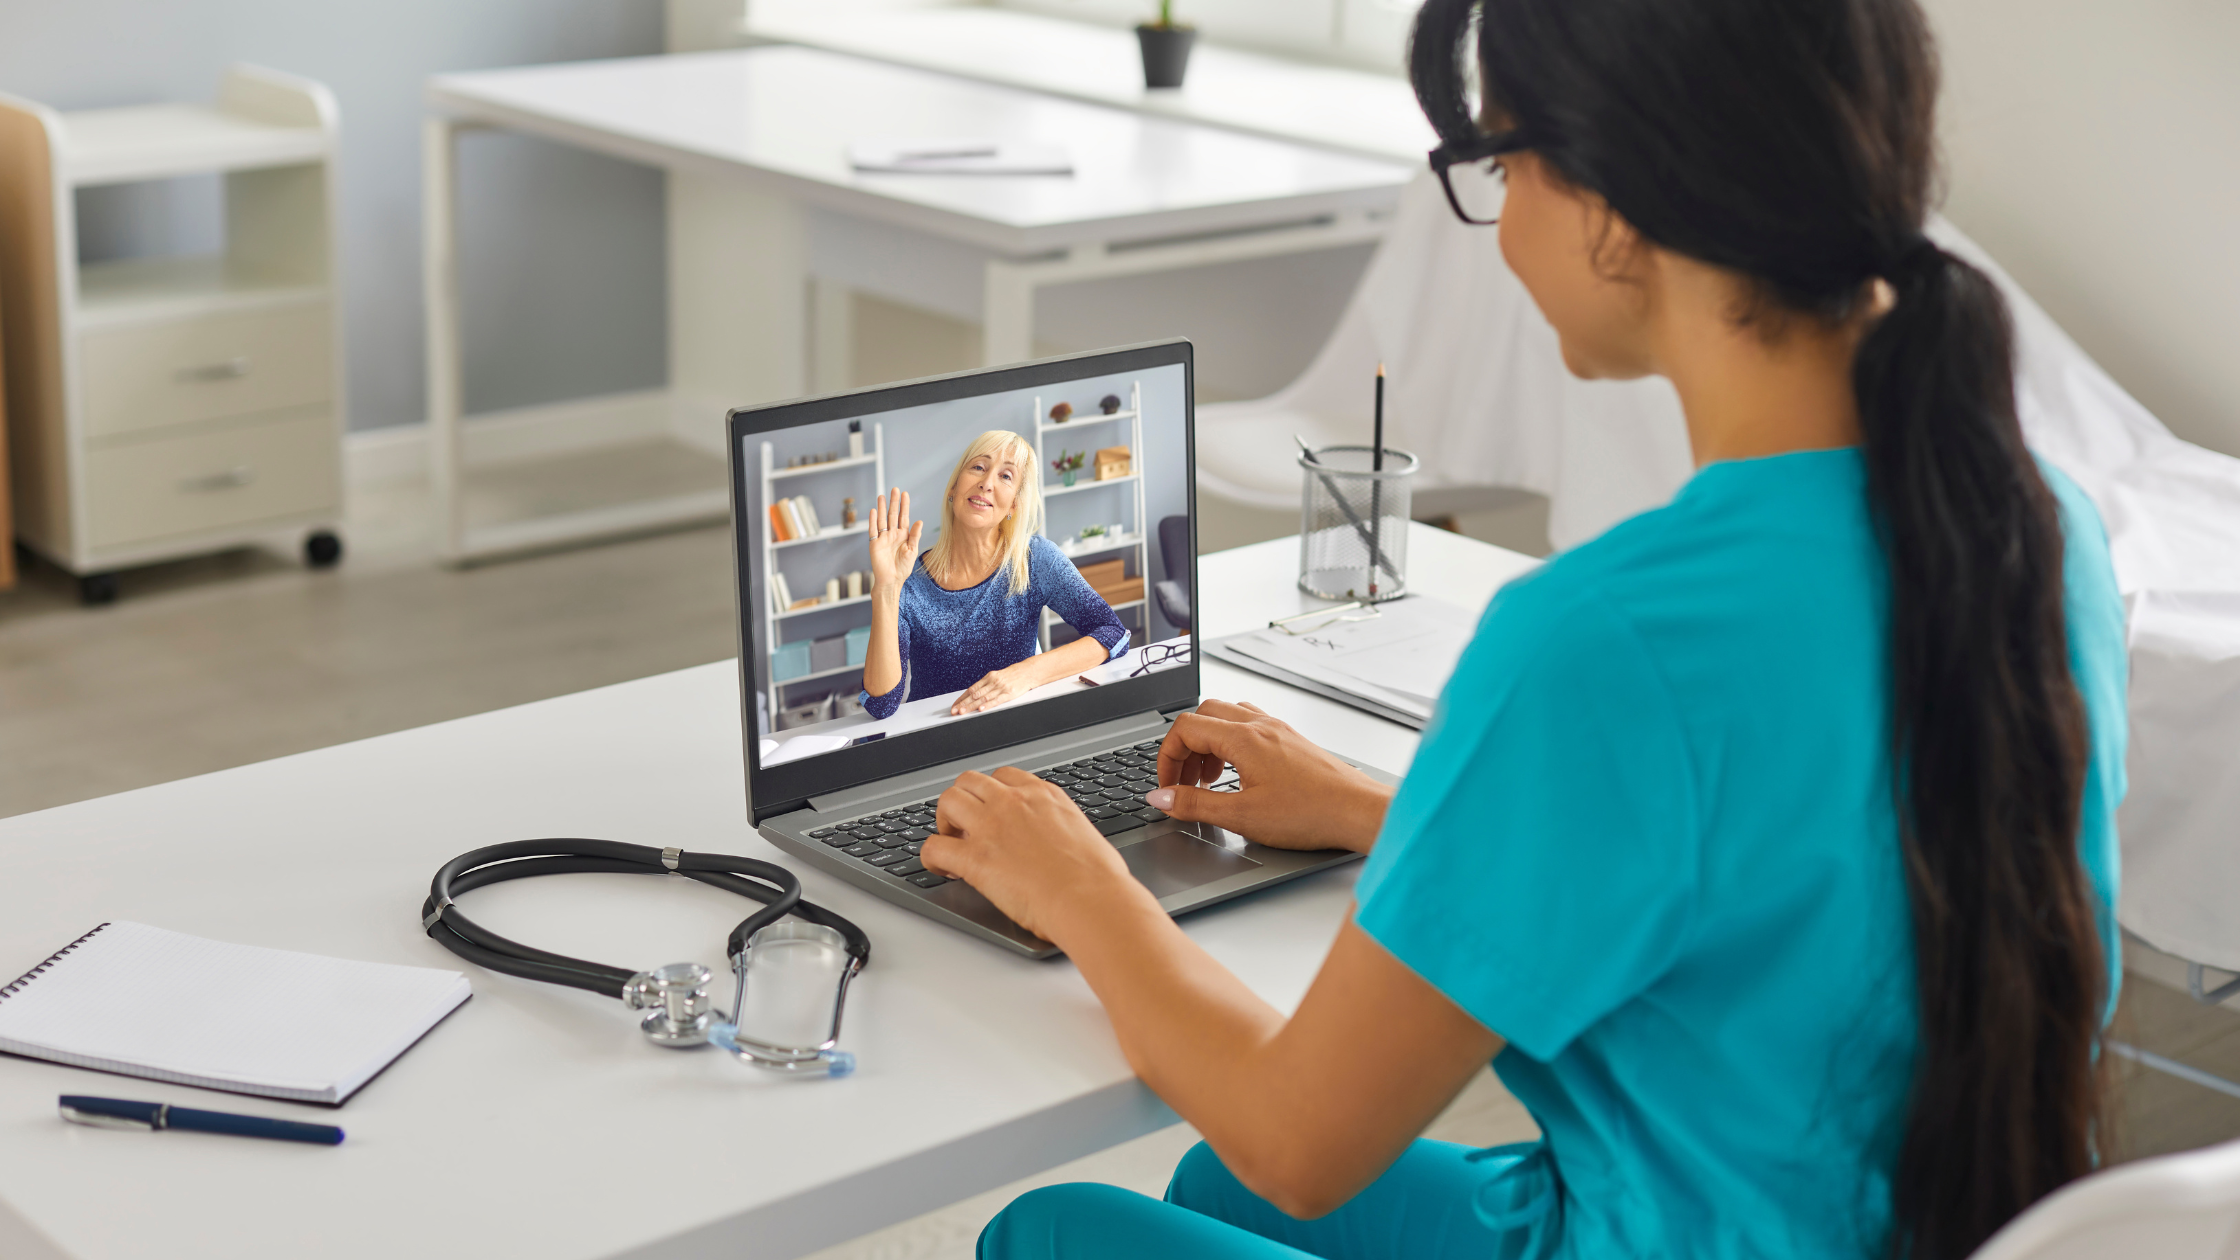 Medical professional and patient on telehealth call